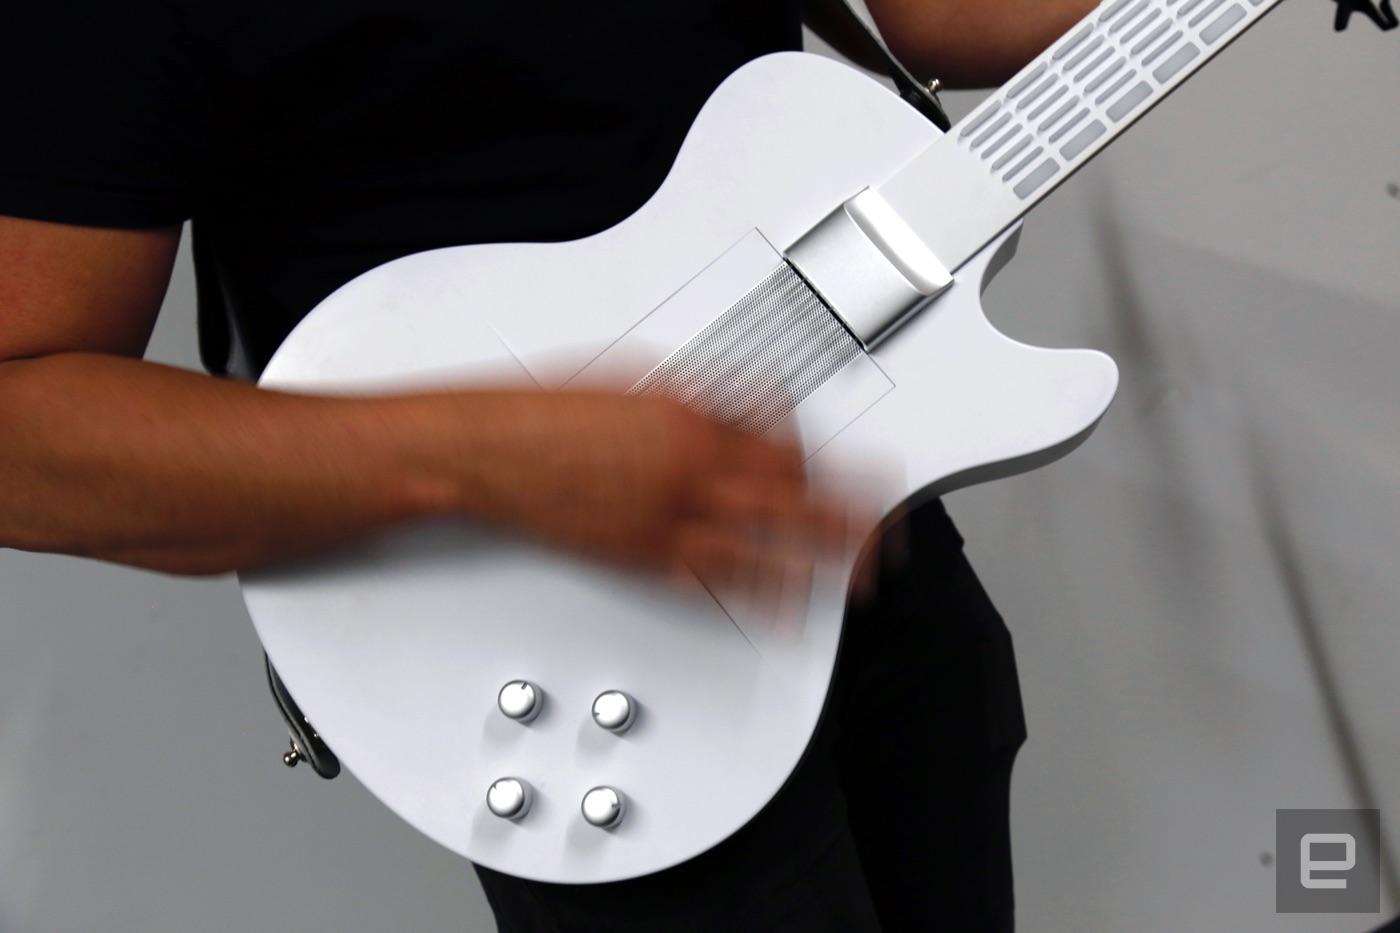 Magic Instruments&#039; digital guitar makes it easy for anyone to jam